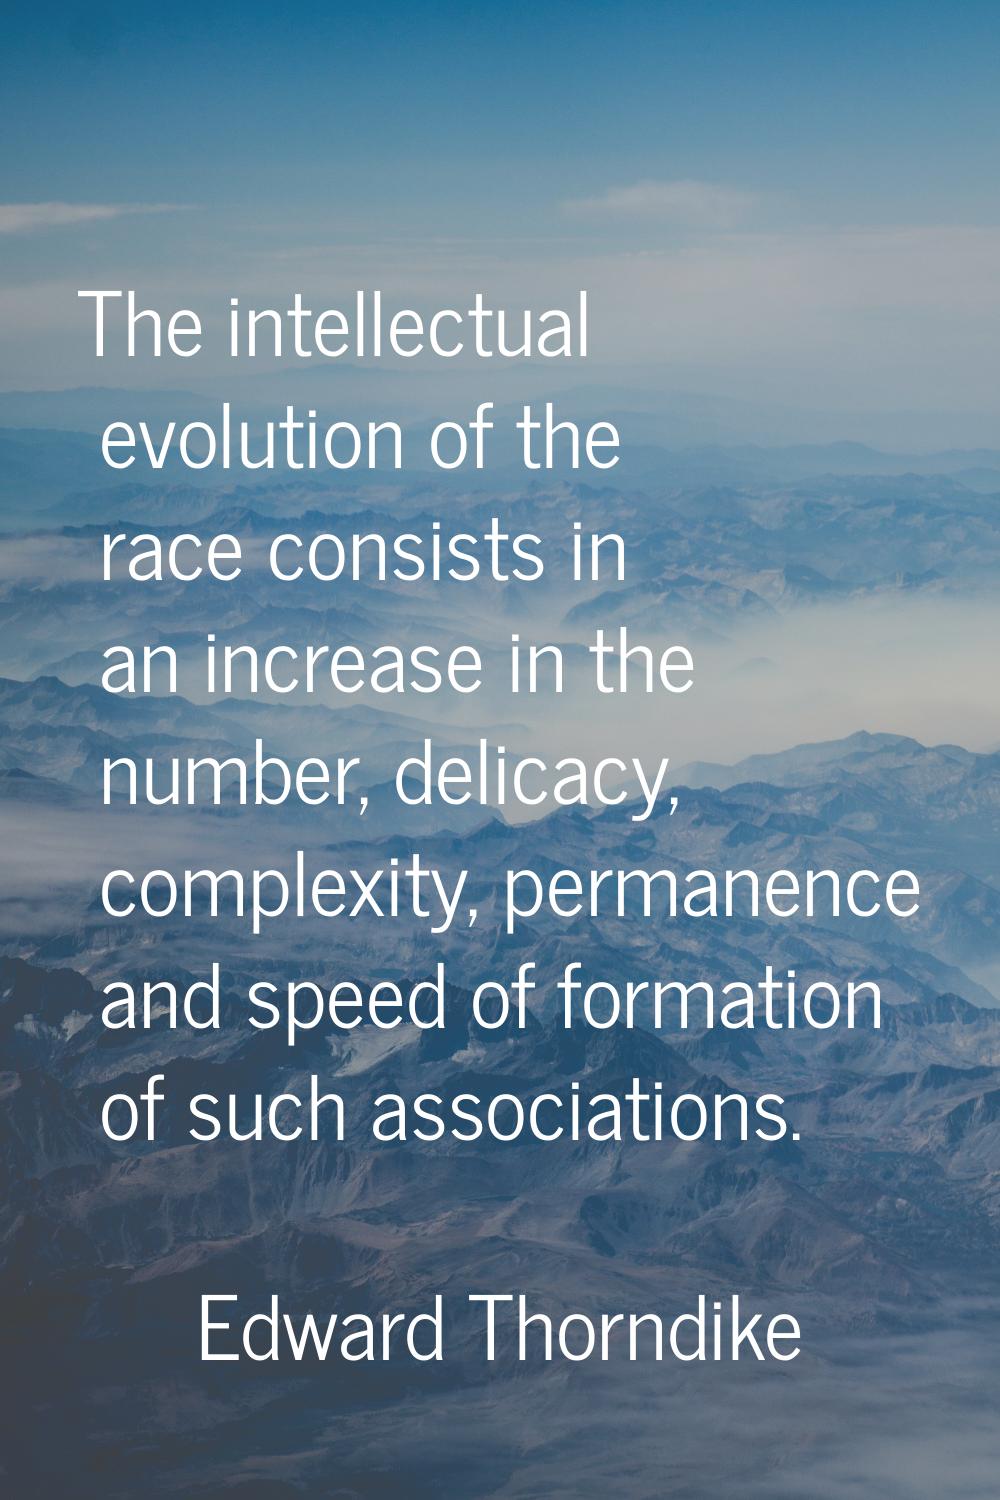 The intellectual evolution of the race consists in an increase in the number, delicacy, complexity,